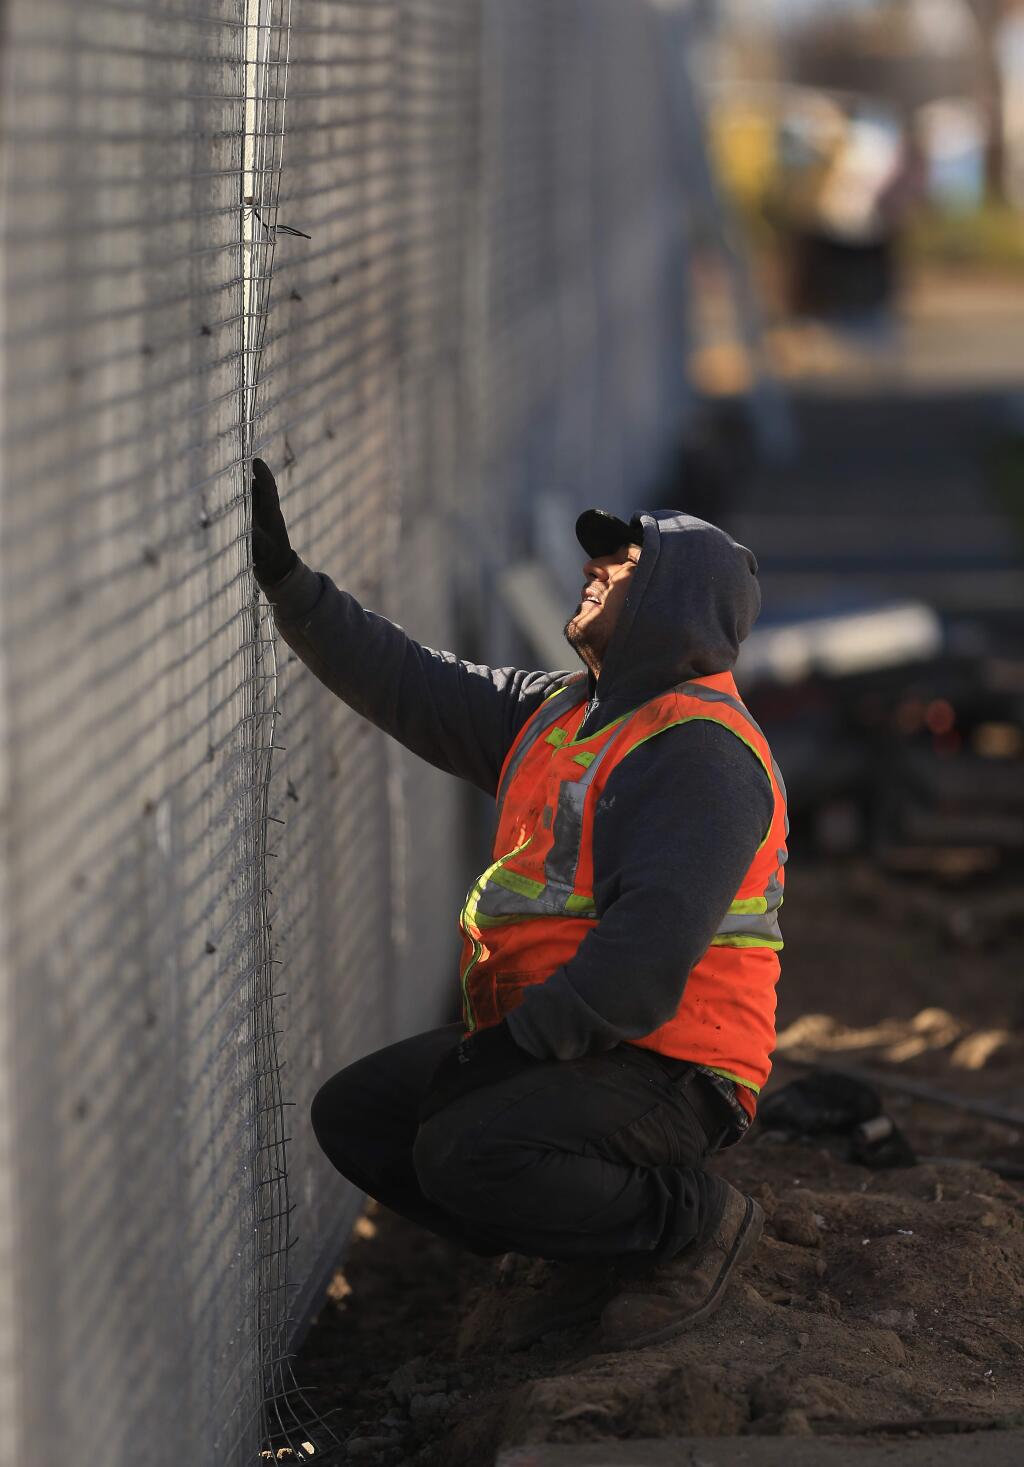 A worker from Hadrian Construction Company looks through a gap in a new soundwall, Friday, Feb. 22, 2019 in Coffey Park, replacing the old walls that were torn down due to Tubbs fire damage in 2017. (Kent Porter / Press Democrat) 2019